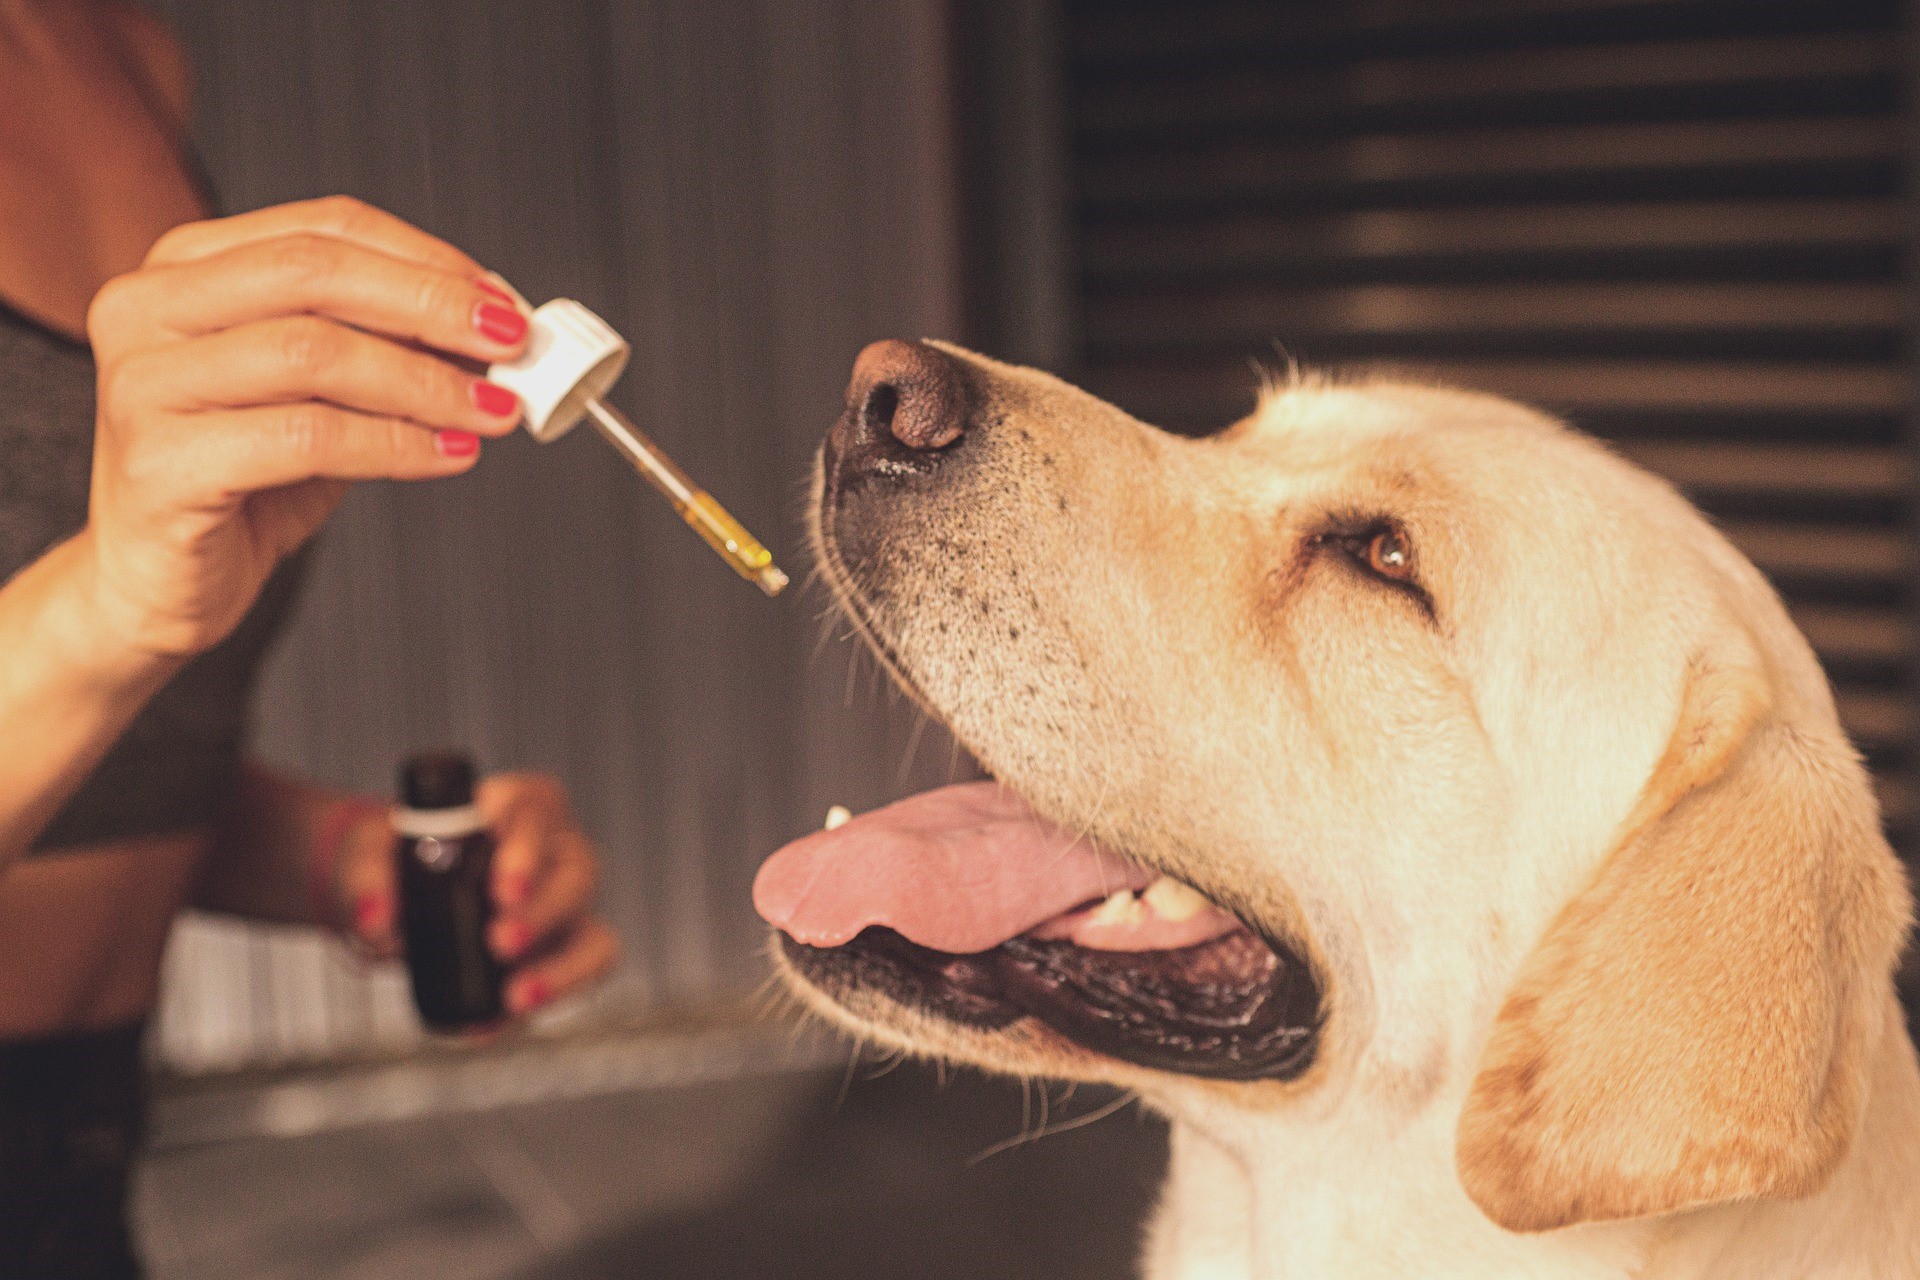 CBD Lotion - Benefits Of Using It For Pets